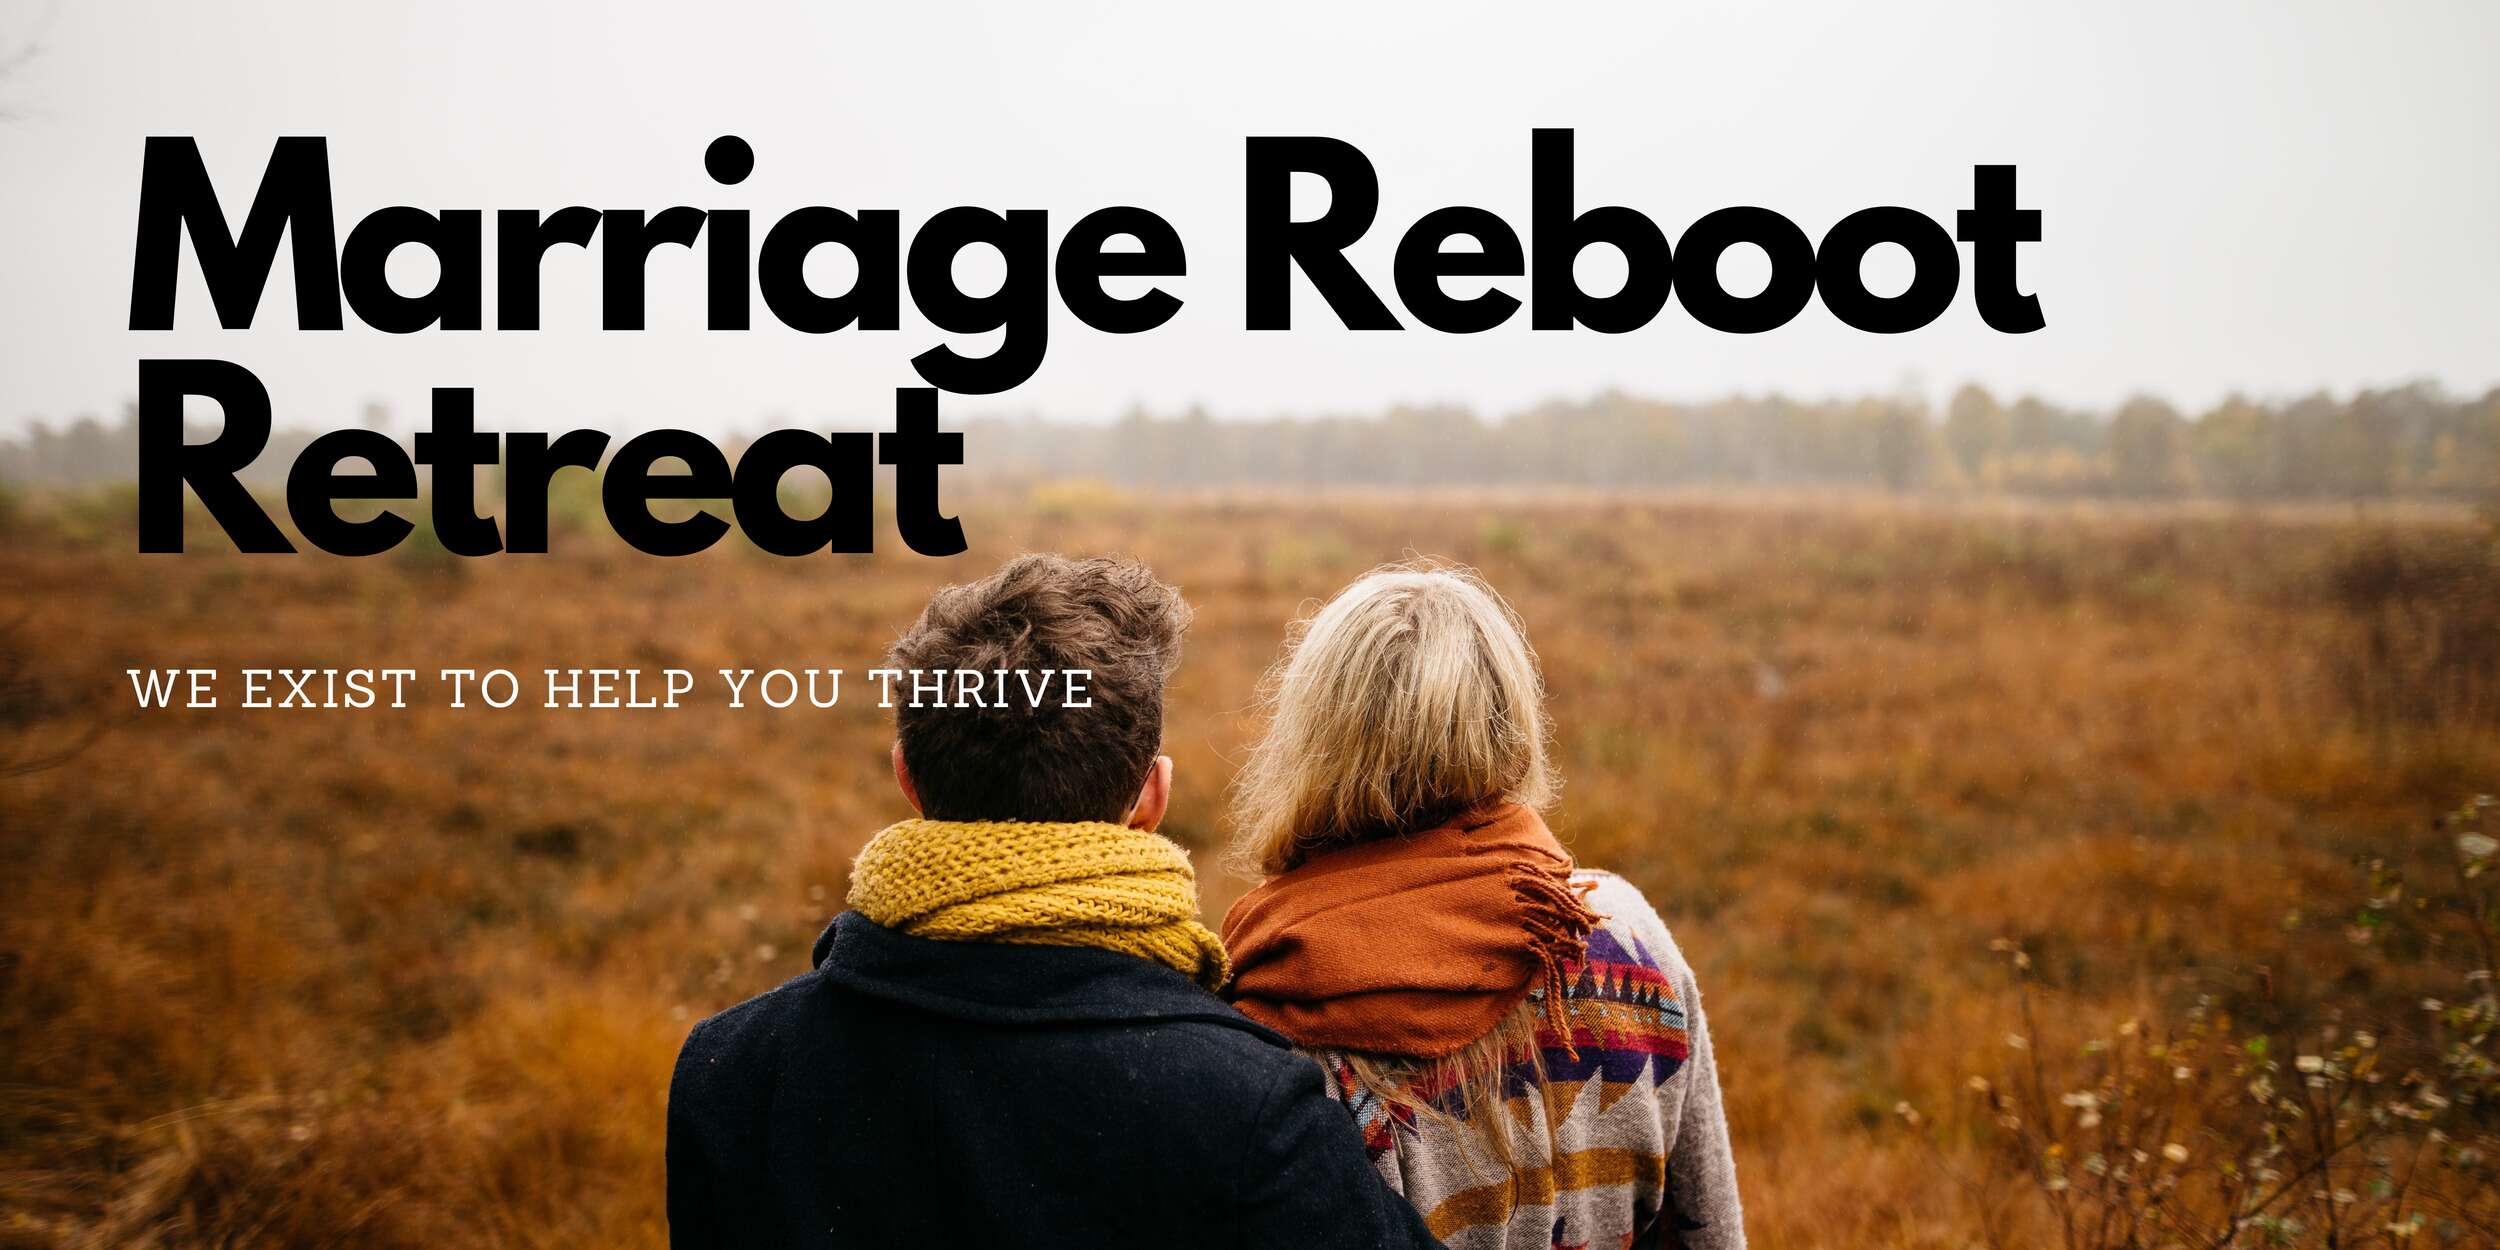 Find out more about our Marriage Reboot Weened Intensive. Front load your healing process with a break through and then moving forward with a purpose and a vision